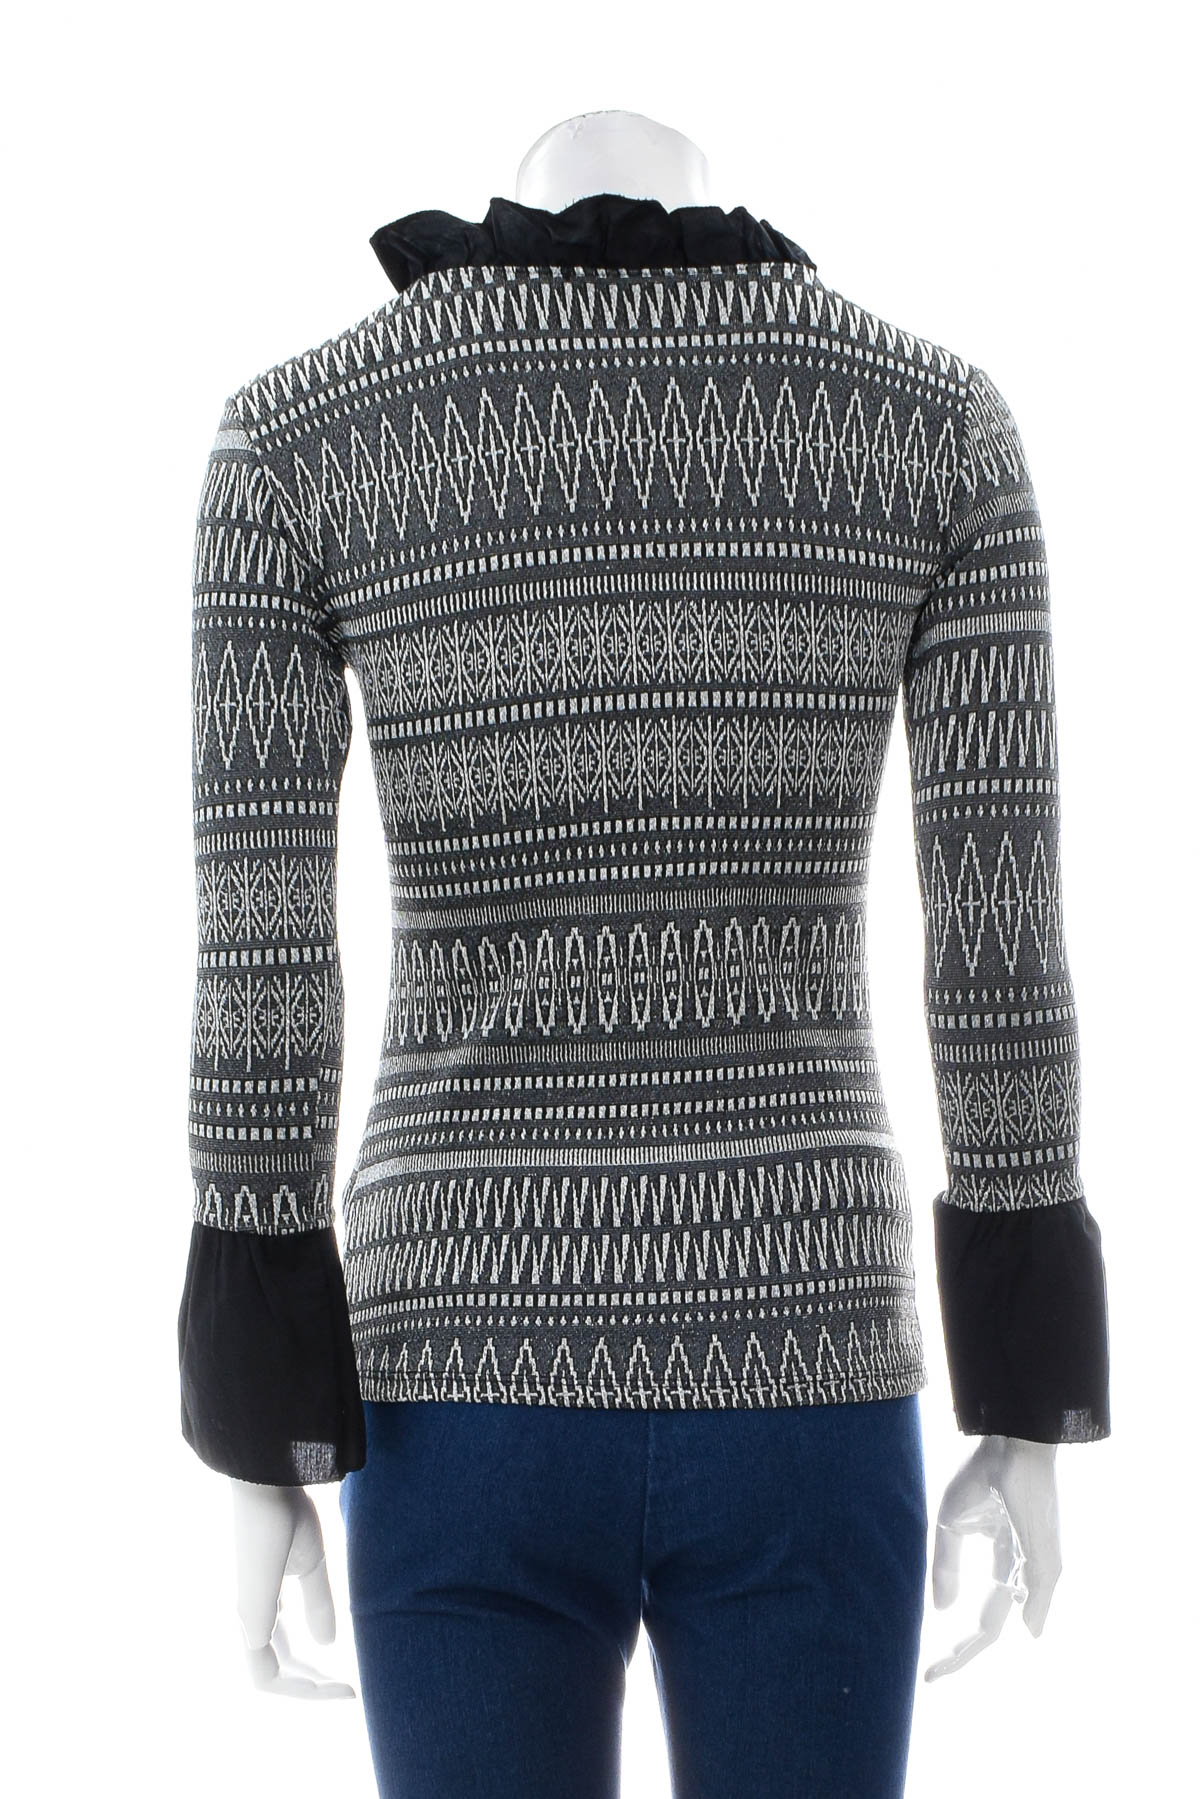 Women's sweater - New Collection - 1